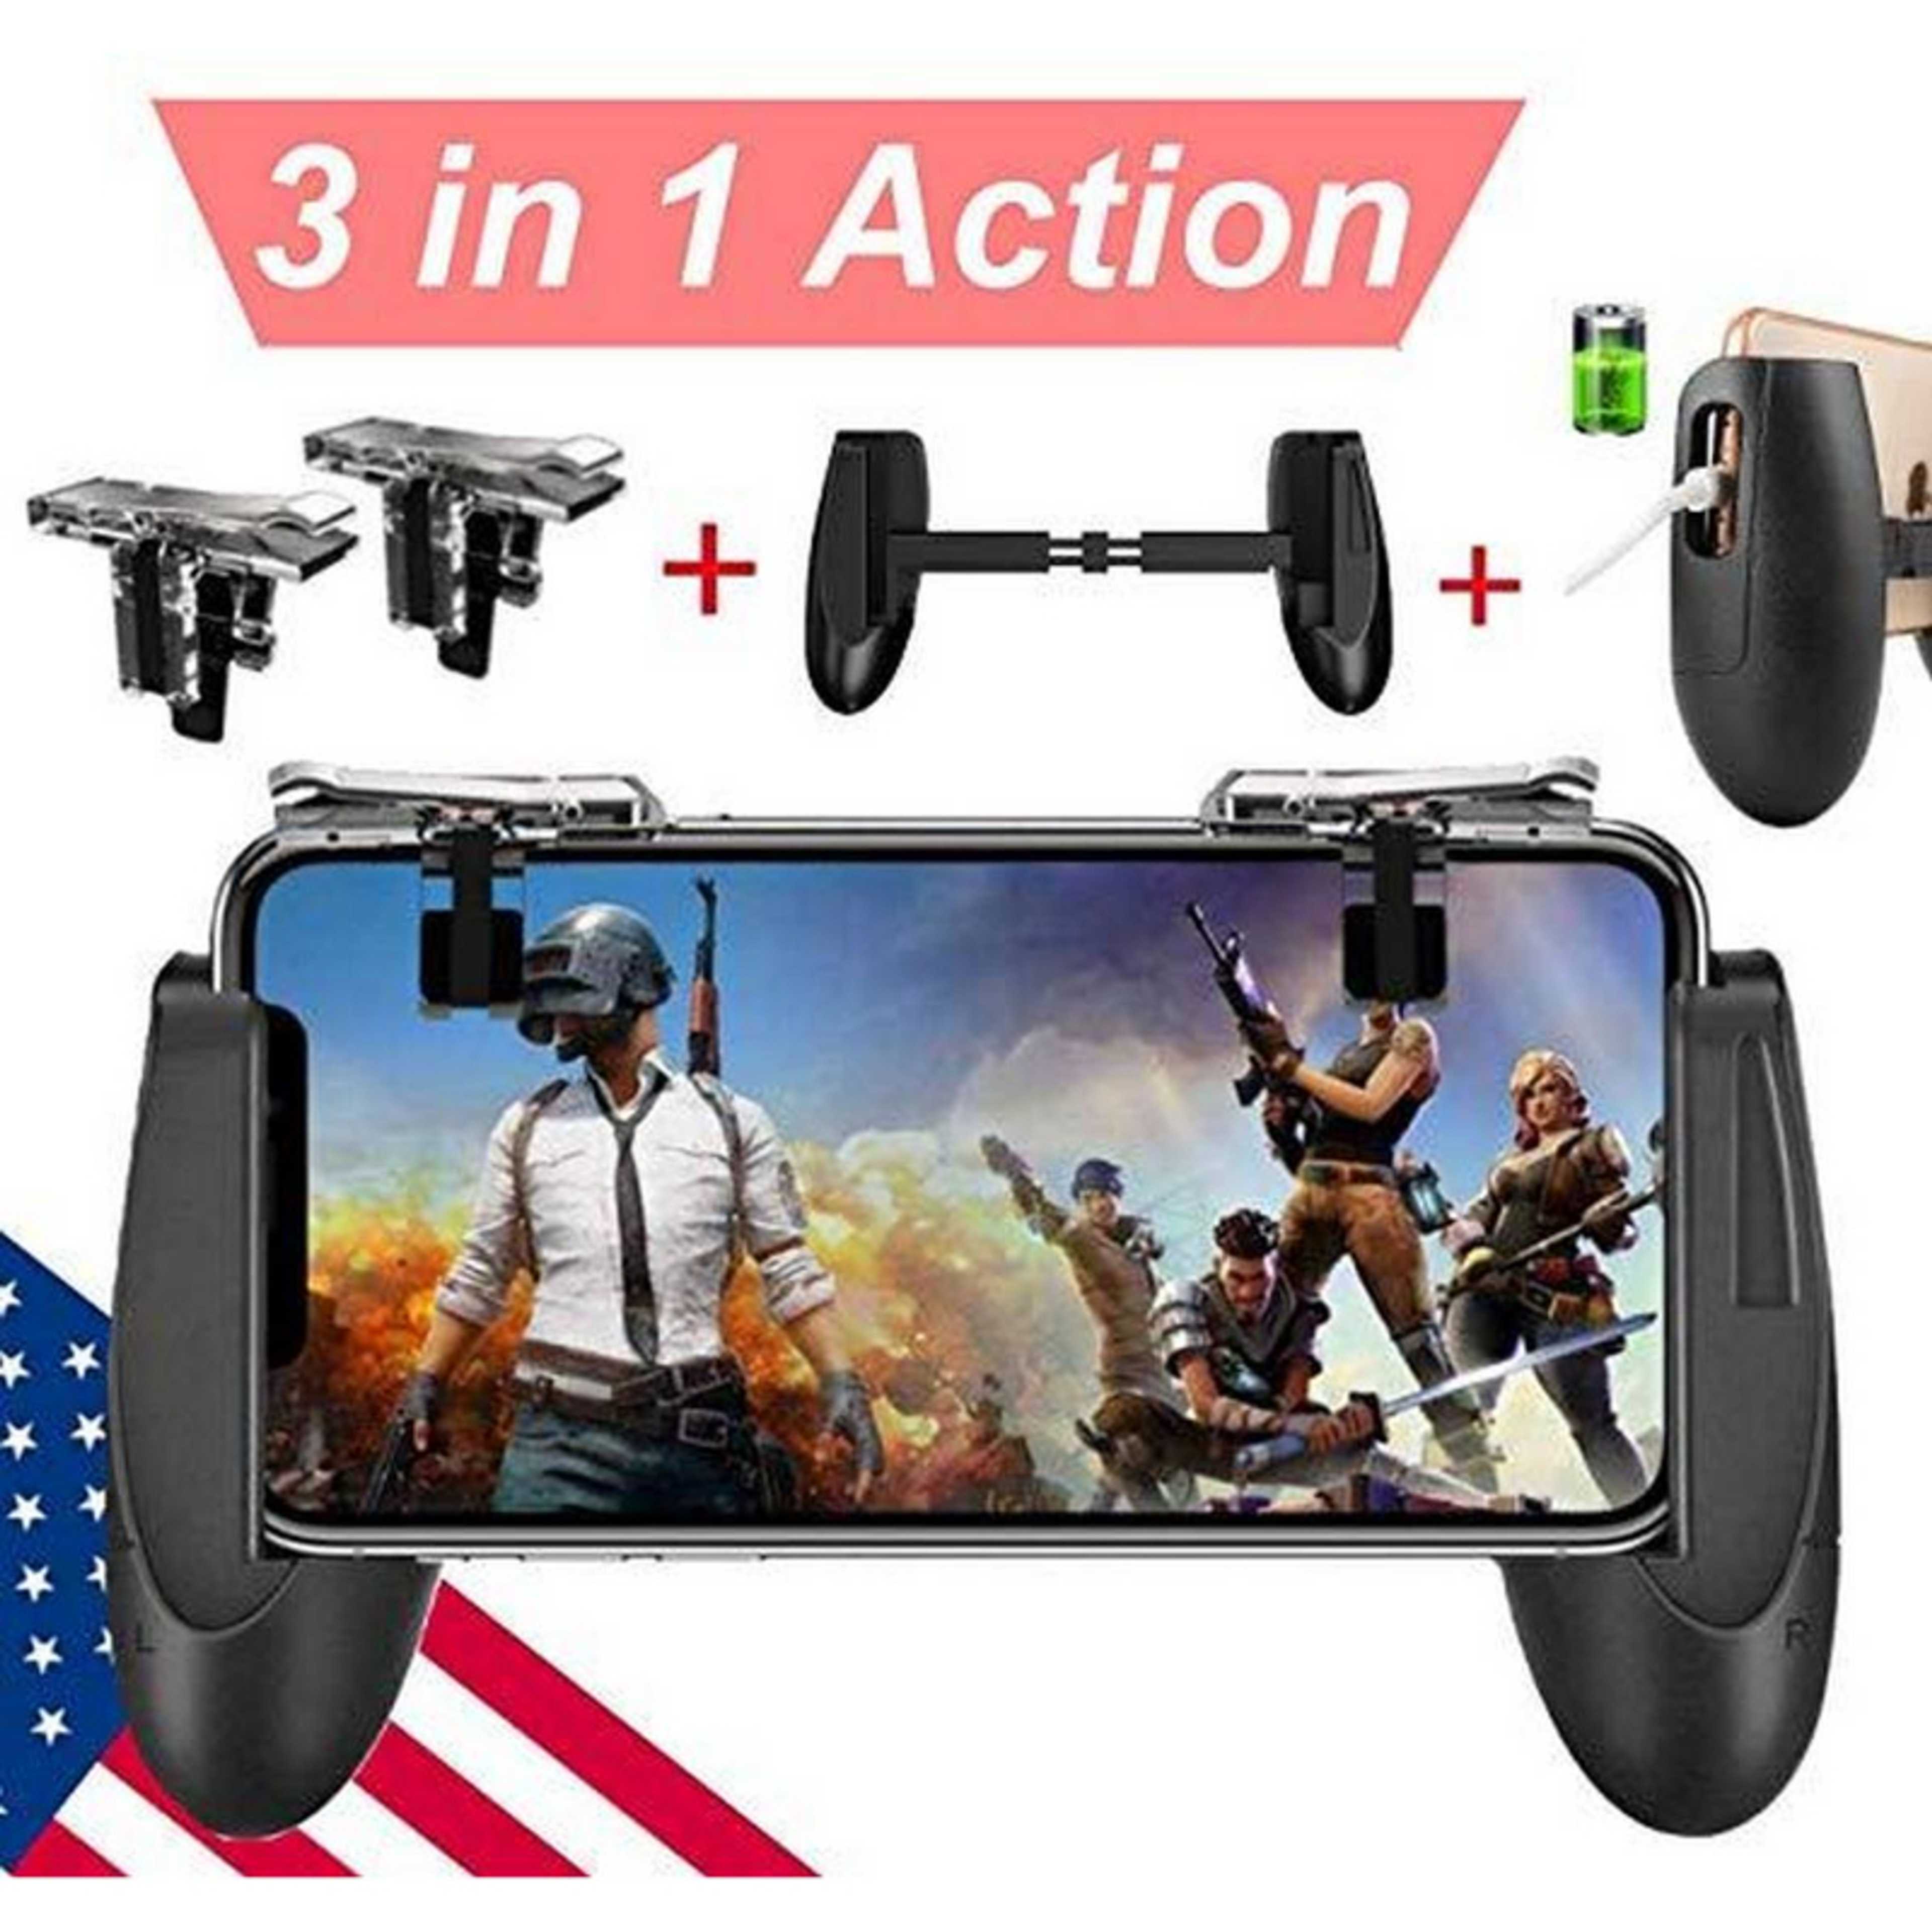 K11 High Quality Metal Triggers PUBG Controller Gamepad Game Handle Moving , Fire Trigger with L1 R1